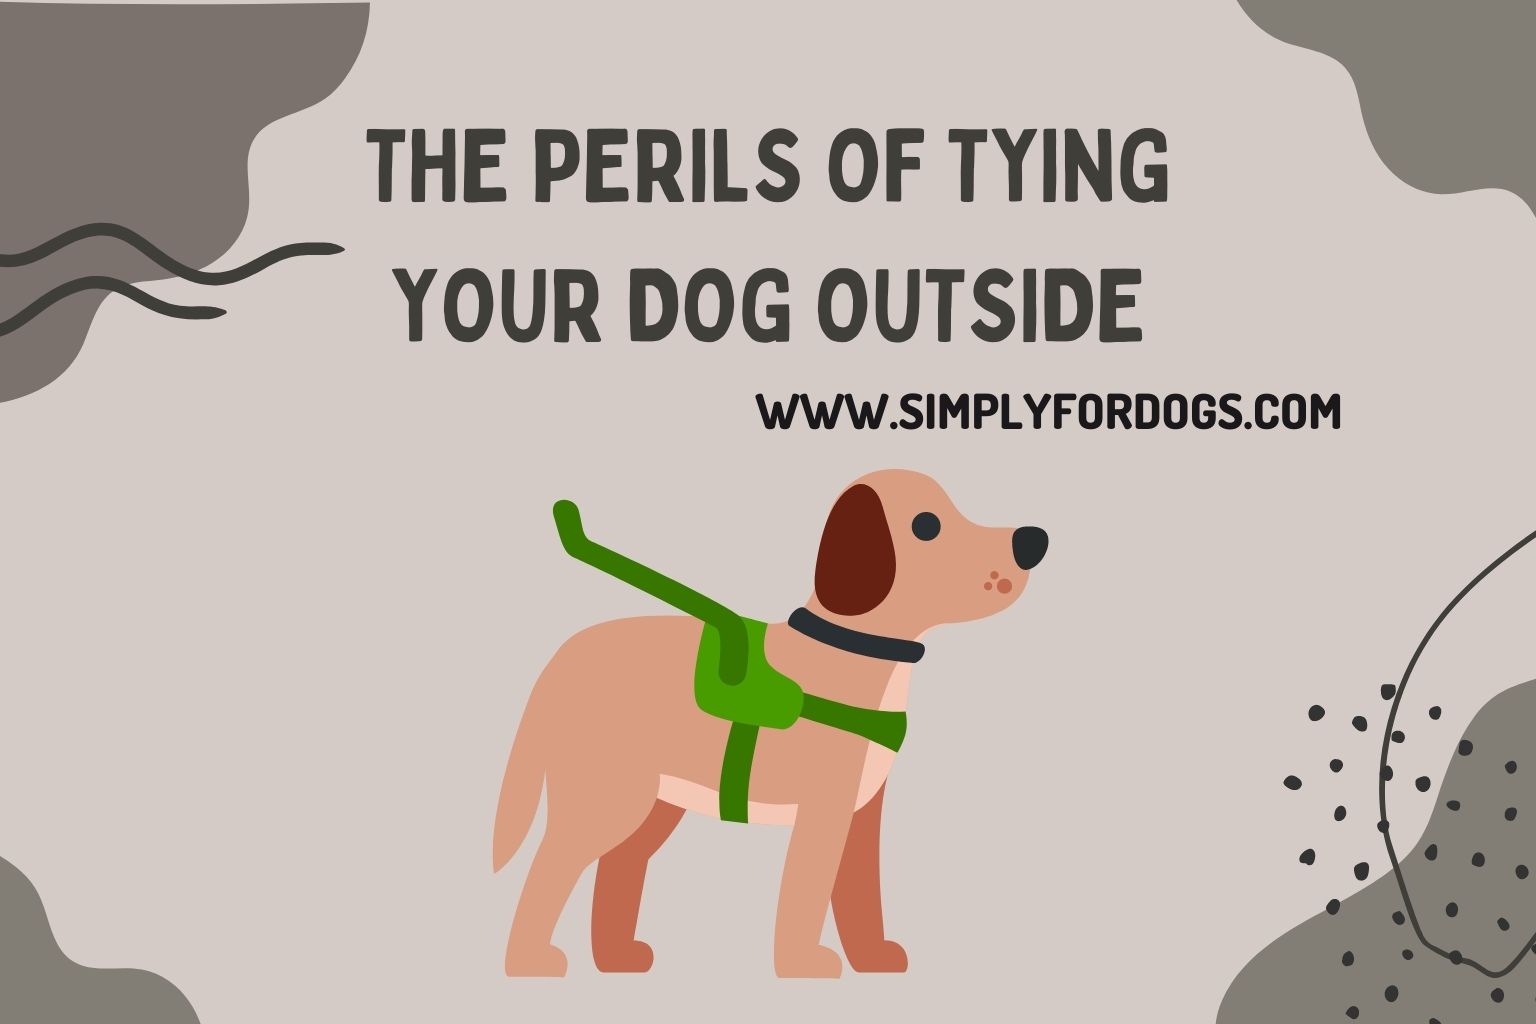 The Perils of Tying Your Dog Outside